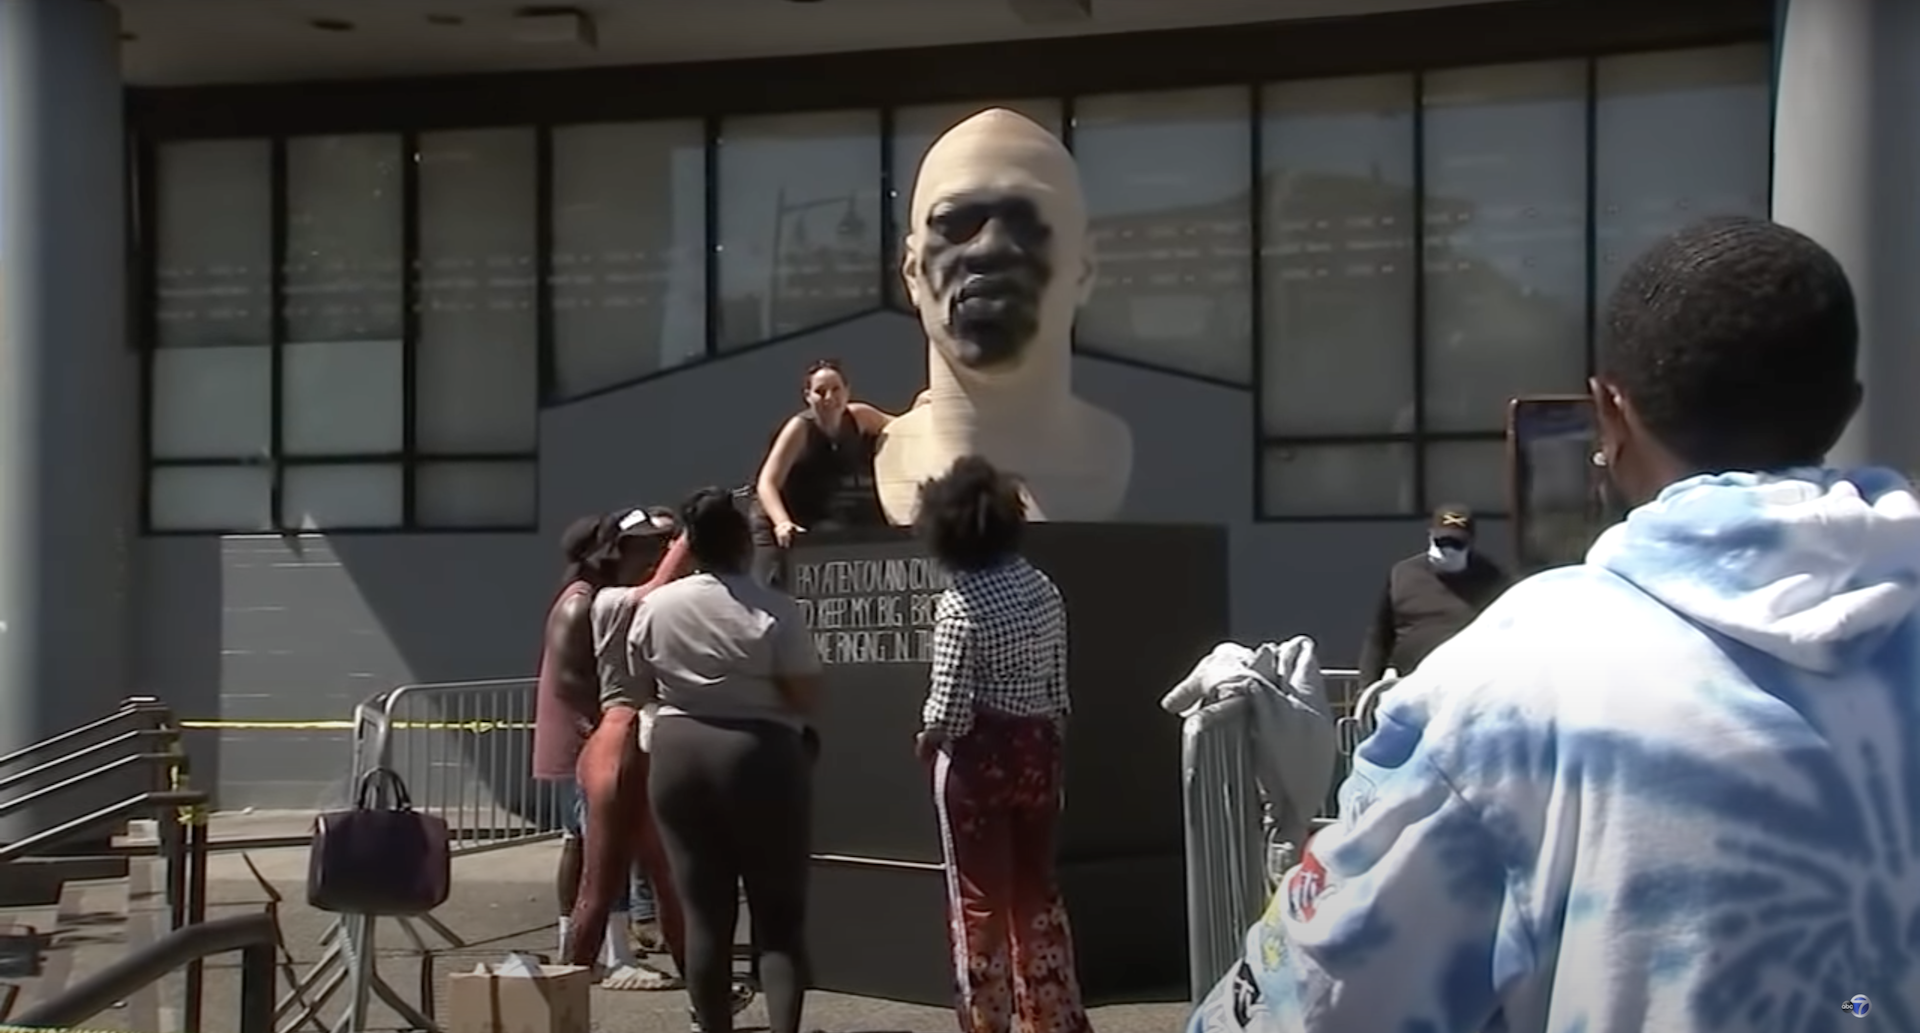 George Floyd Statues in New Jersey and New York Vandalized, Being Investigated As Hate Crime